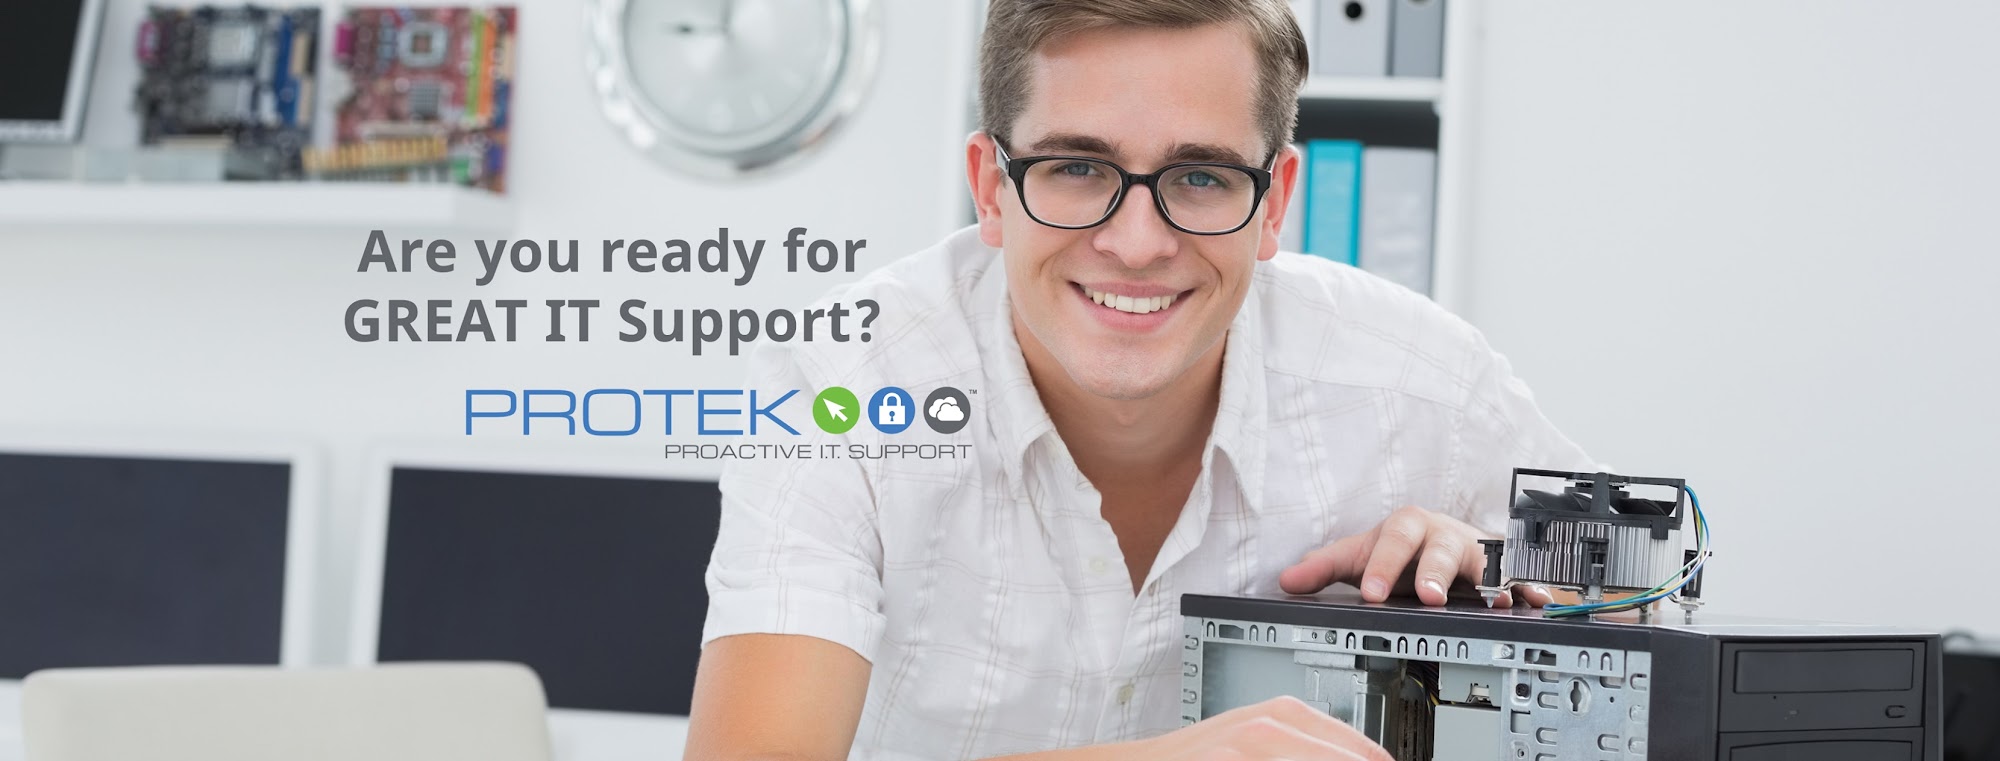 Protek Support - Managed IT Services Company Utah